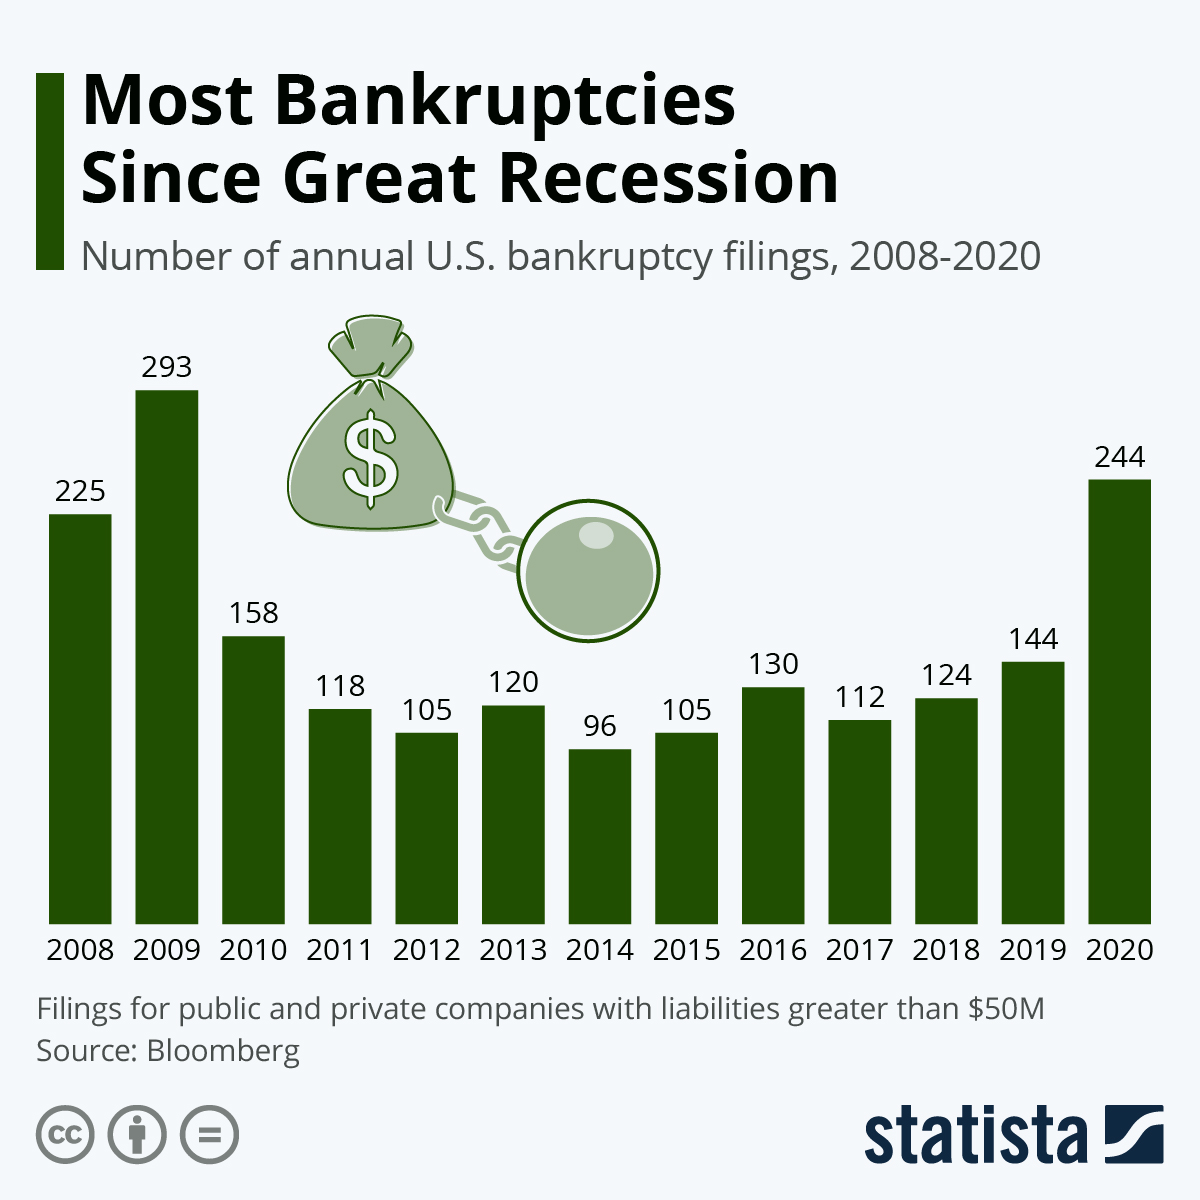 Most Bankruptcies Since Great Recession